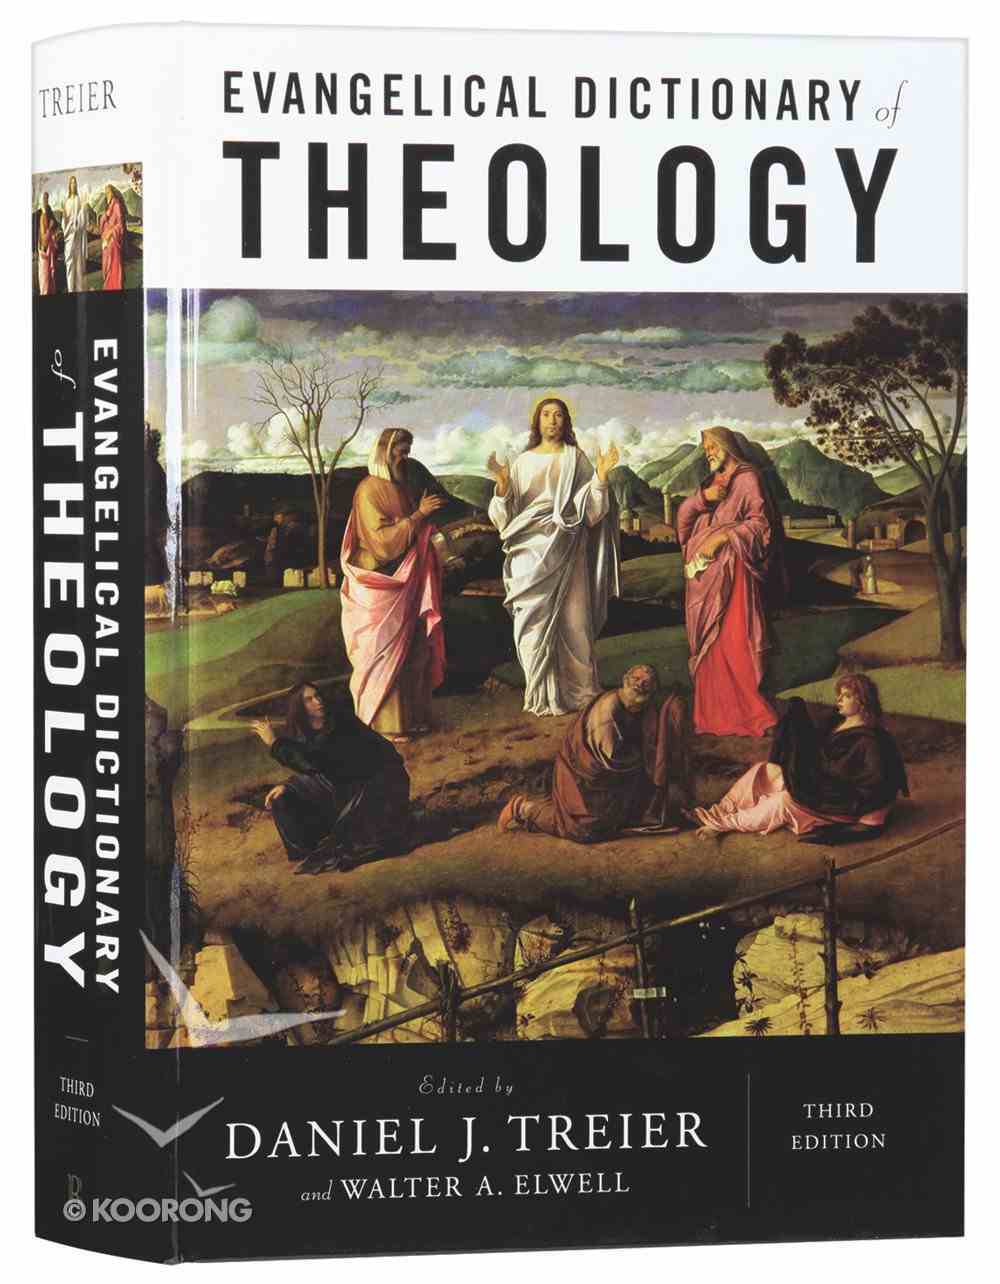 Evangelical Dictionary of Theology (Third Edition) (Baker Reference Library Series) Hardback